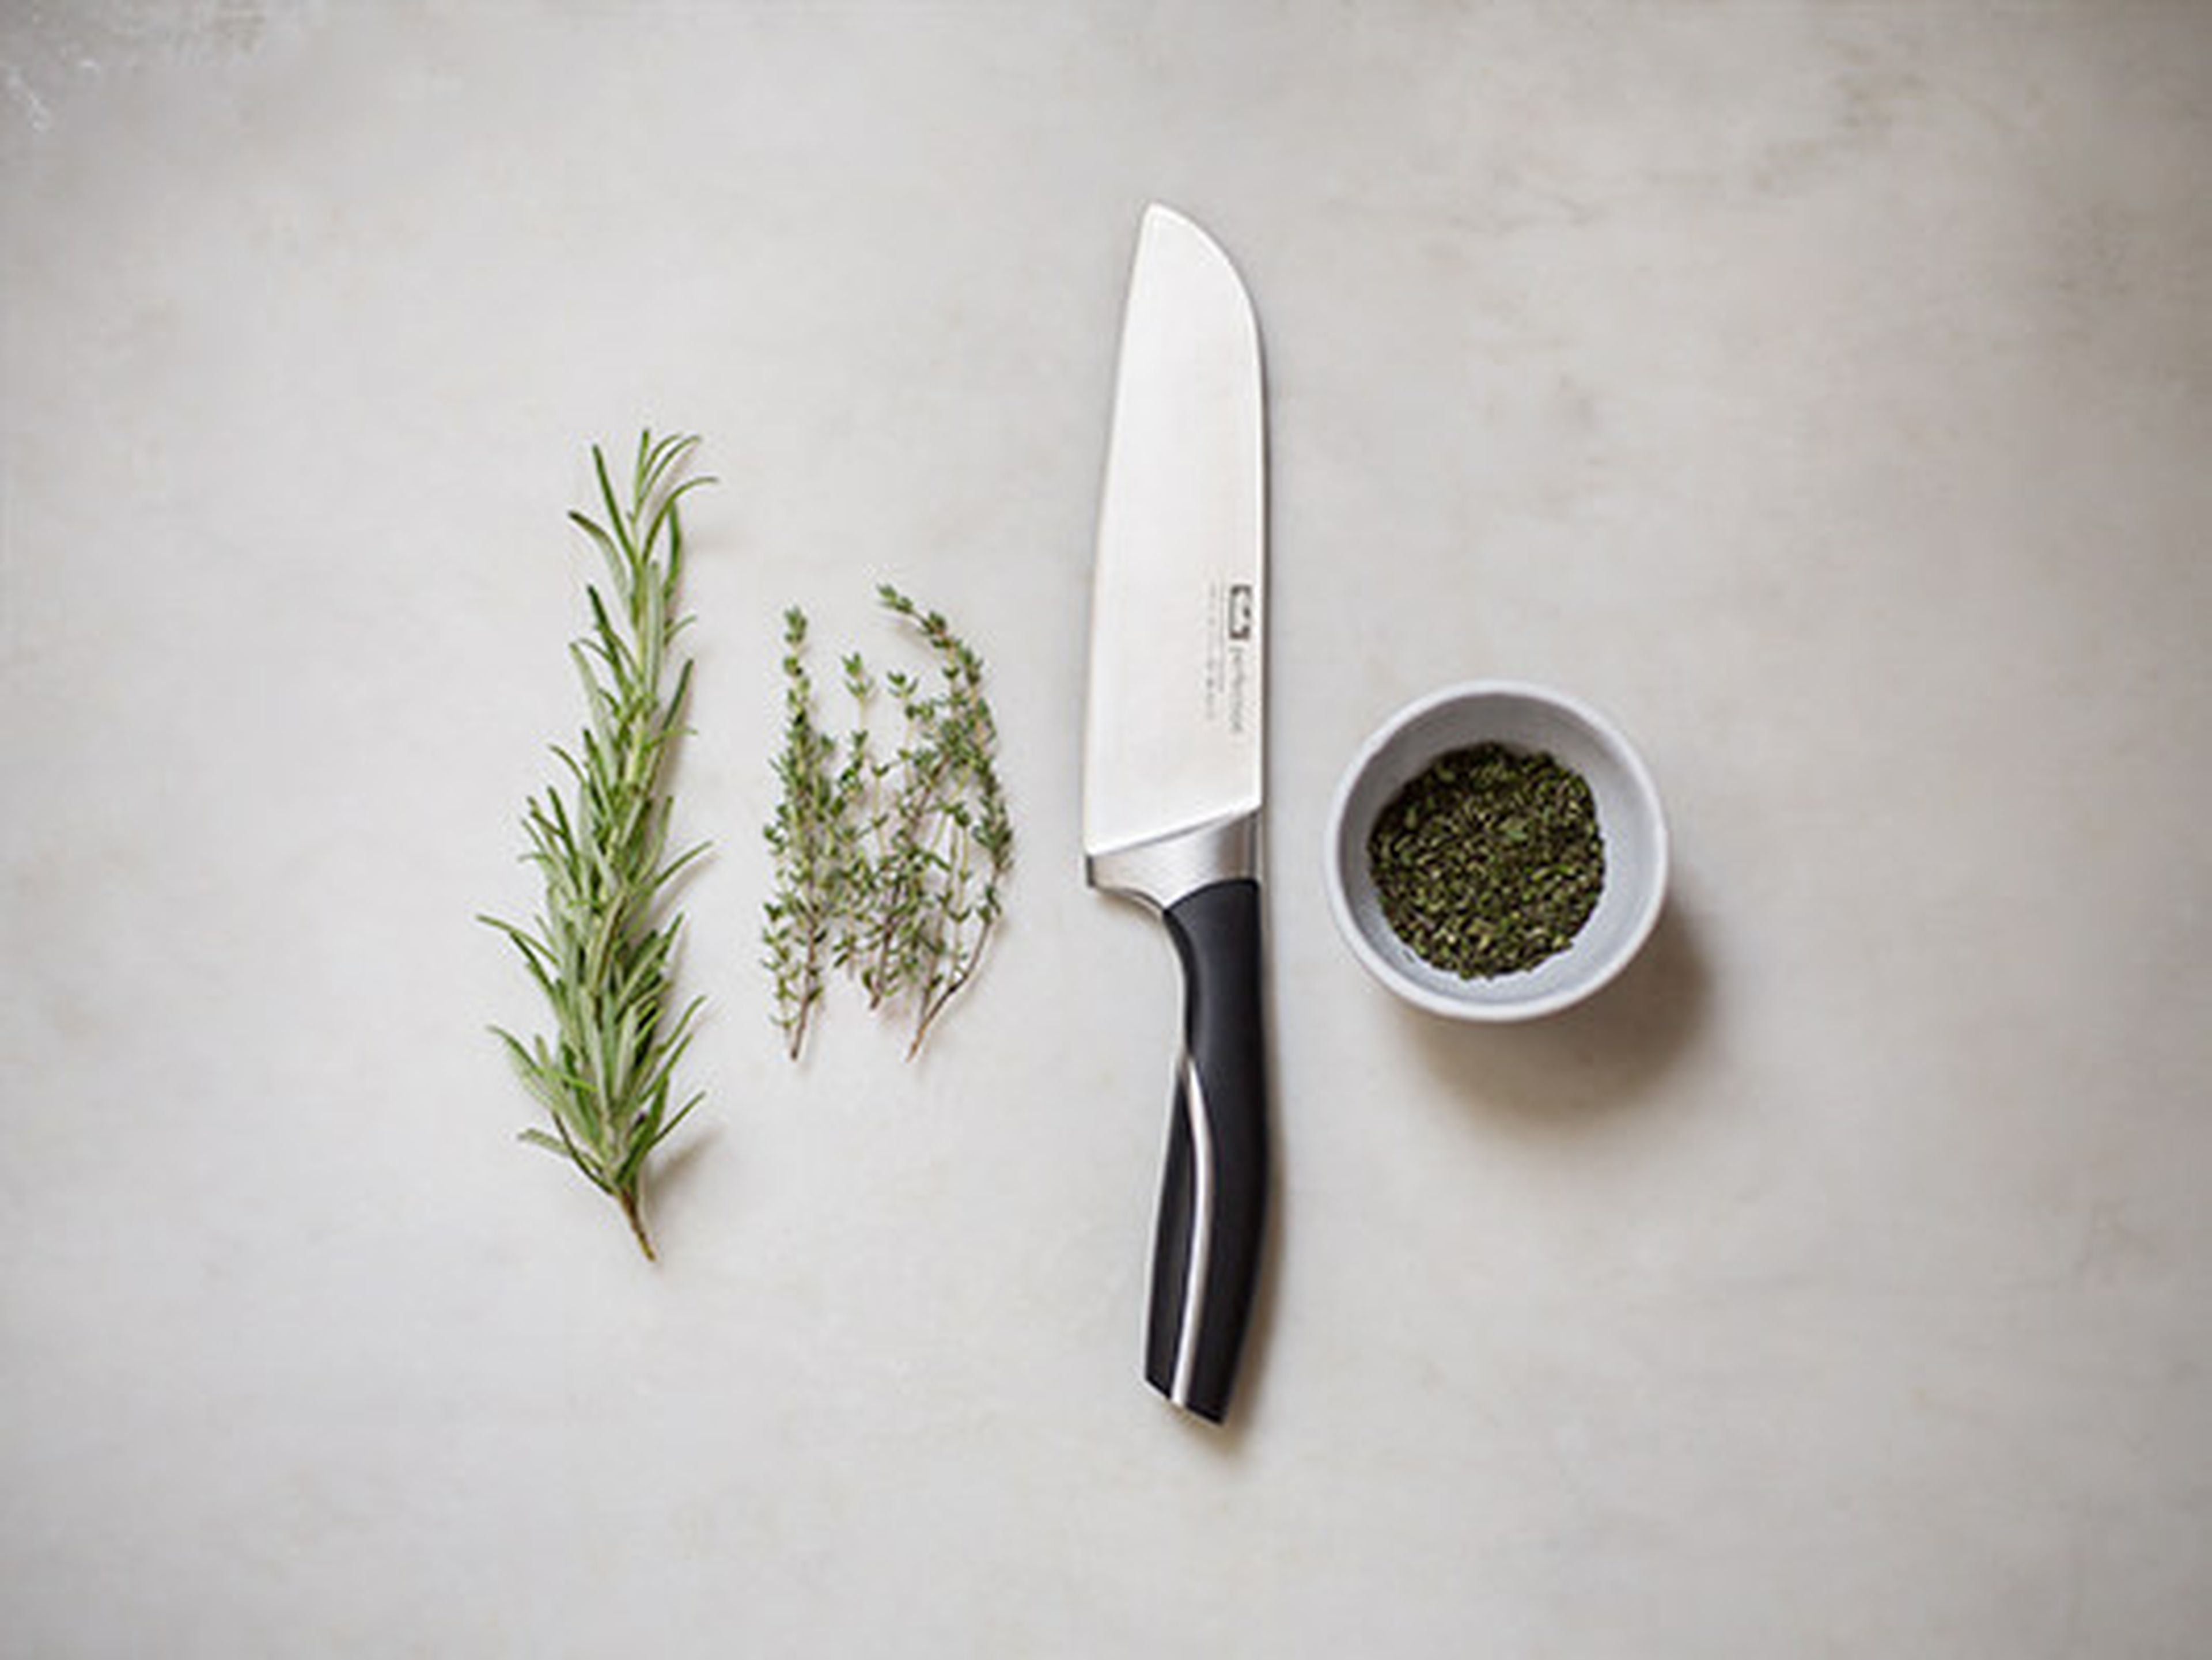 How to chop herbs